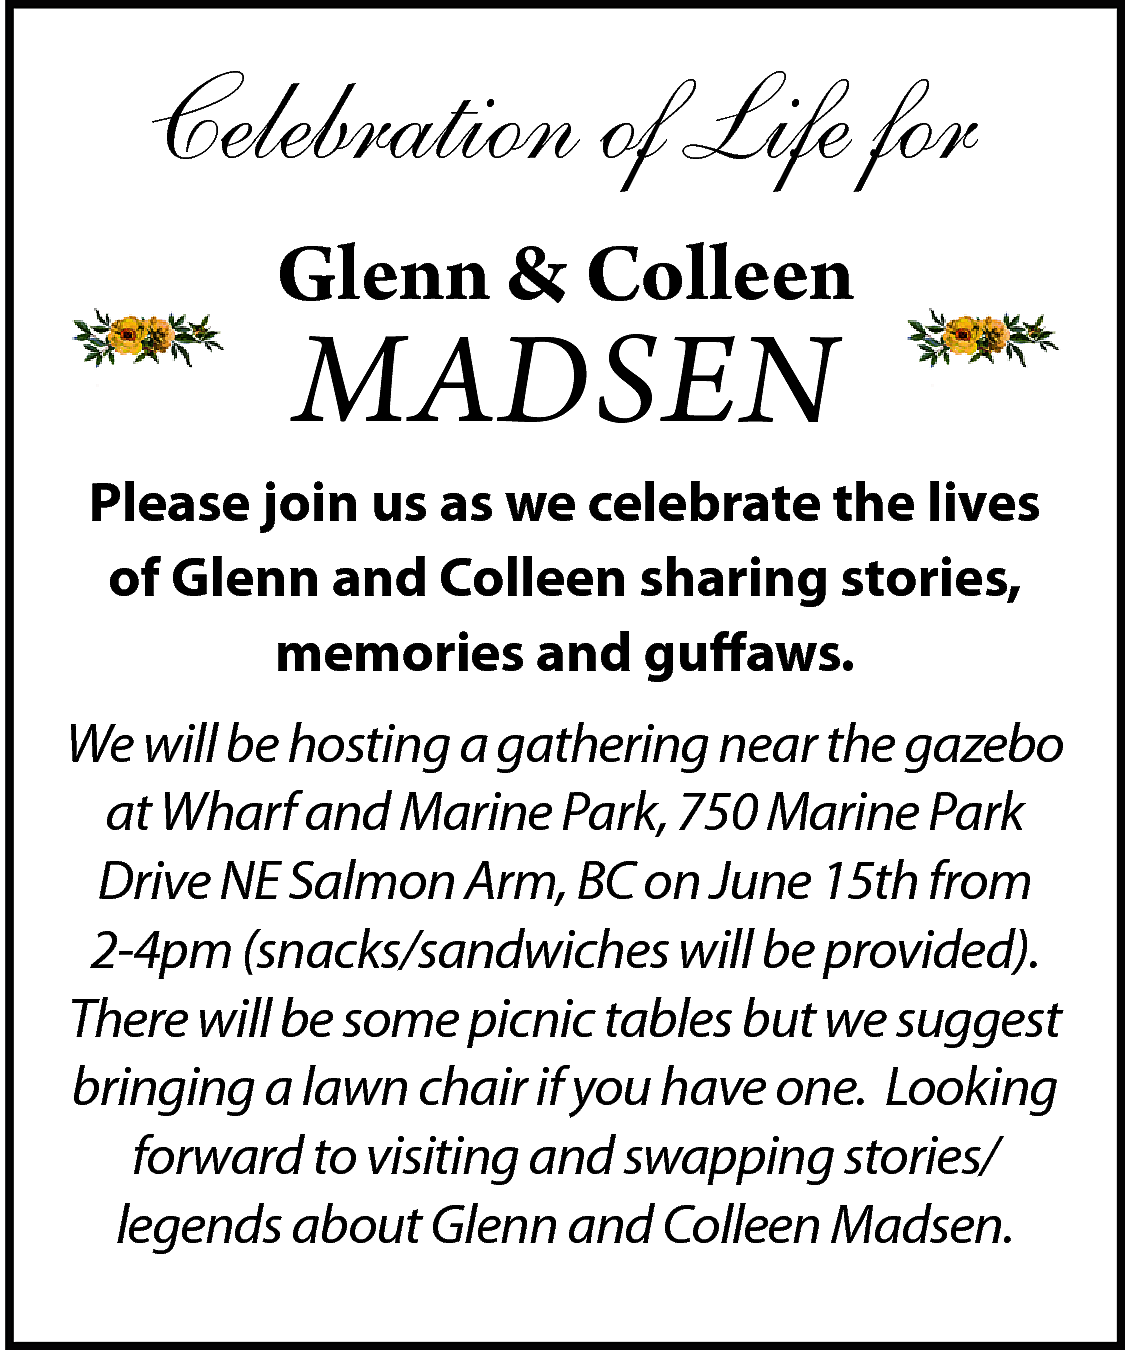 Celebration of Life for <br>Glenn  Celebration of Life for  Glenn & Colleen    MADSEN    Please join us as we celebrate the lives  of Glenn and Colleen sharing stories,  memories and guffaws.  We will be hosting a gathering near the gazebo  at Wharf and Marine Park, 750 Marine Park  Drive NE Salmon Arm, BC on June 15th from  2-4pm (snacks/sandwiches will be provided).  There will be some picnic tables but we suggest  bringing a lawn chair if you have one. Looking  forward to visiting and swapping stories/  legends about Glenn and Colleen Madsen.    